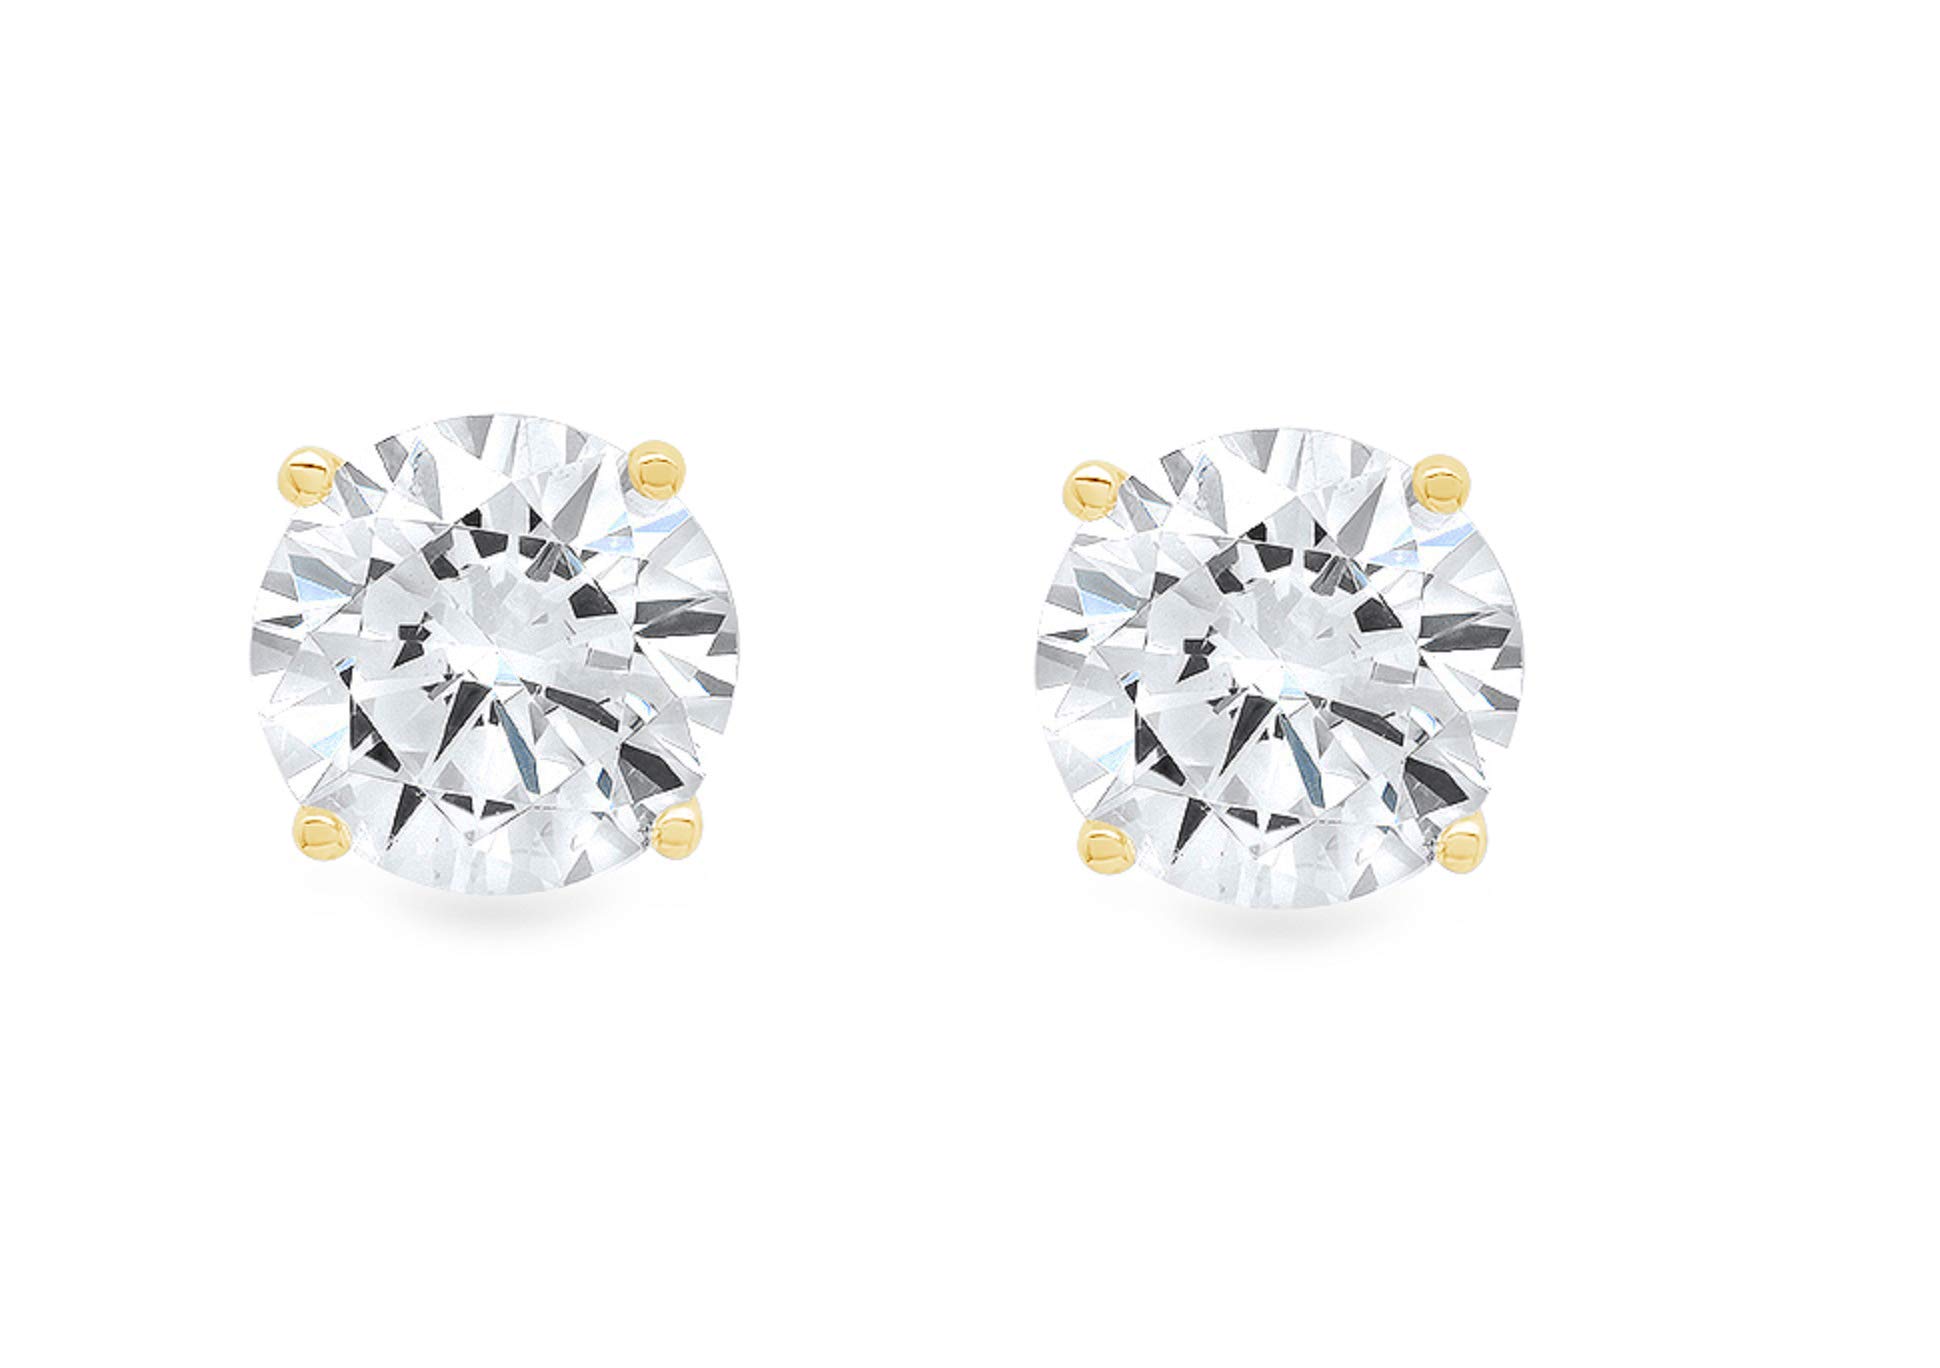 1.9ct Round Cut ideal VVS1 Conflict Free Gemstone Solitaire Genuine Moissanite Unisex Designer Stud Earrings Solid 14k Yellow Gold Push Back